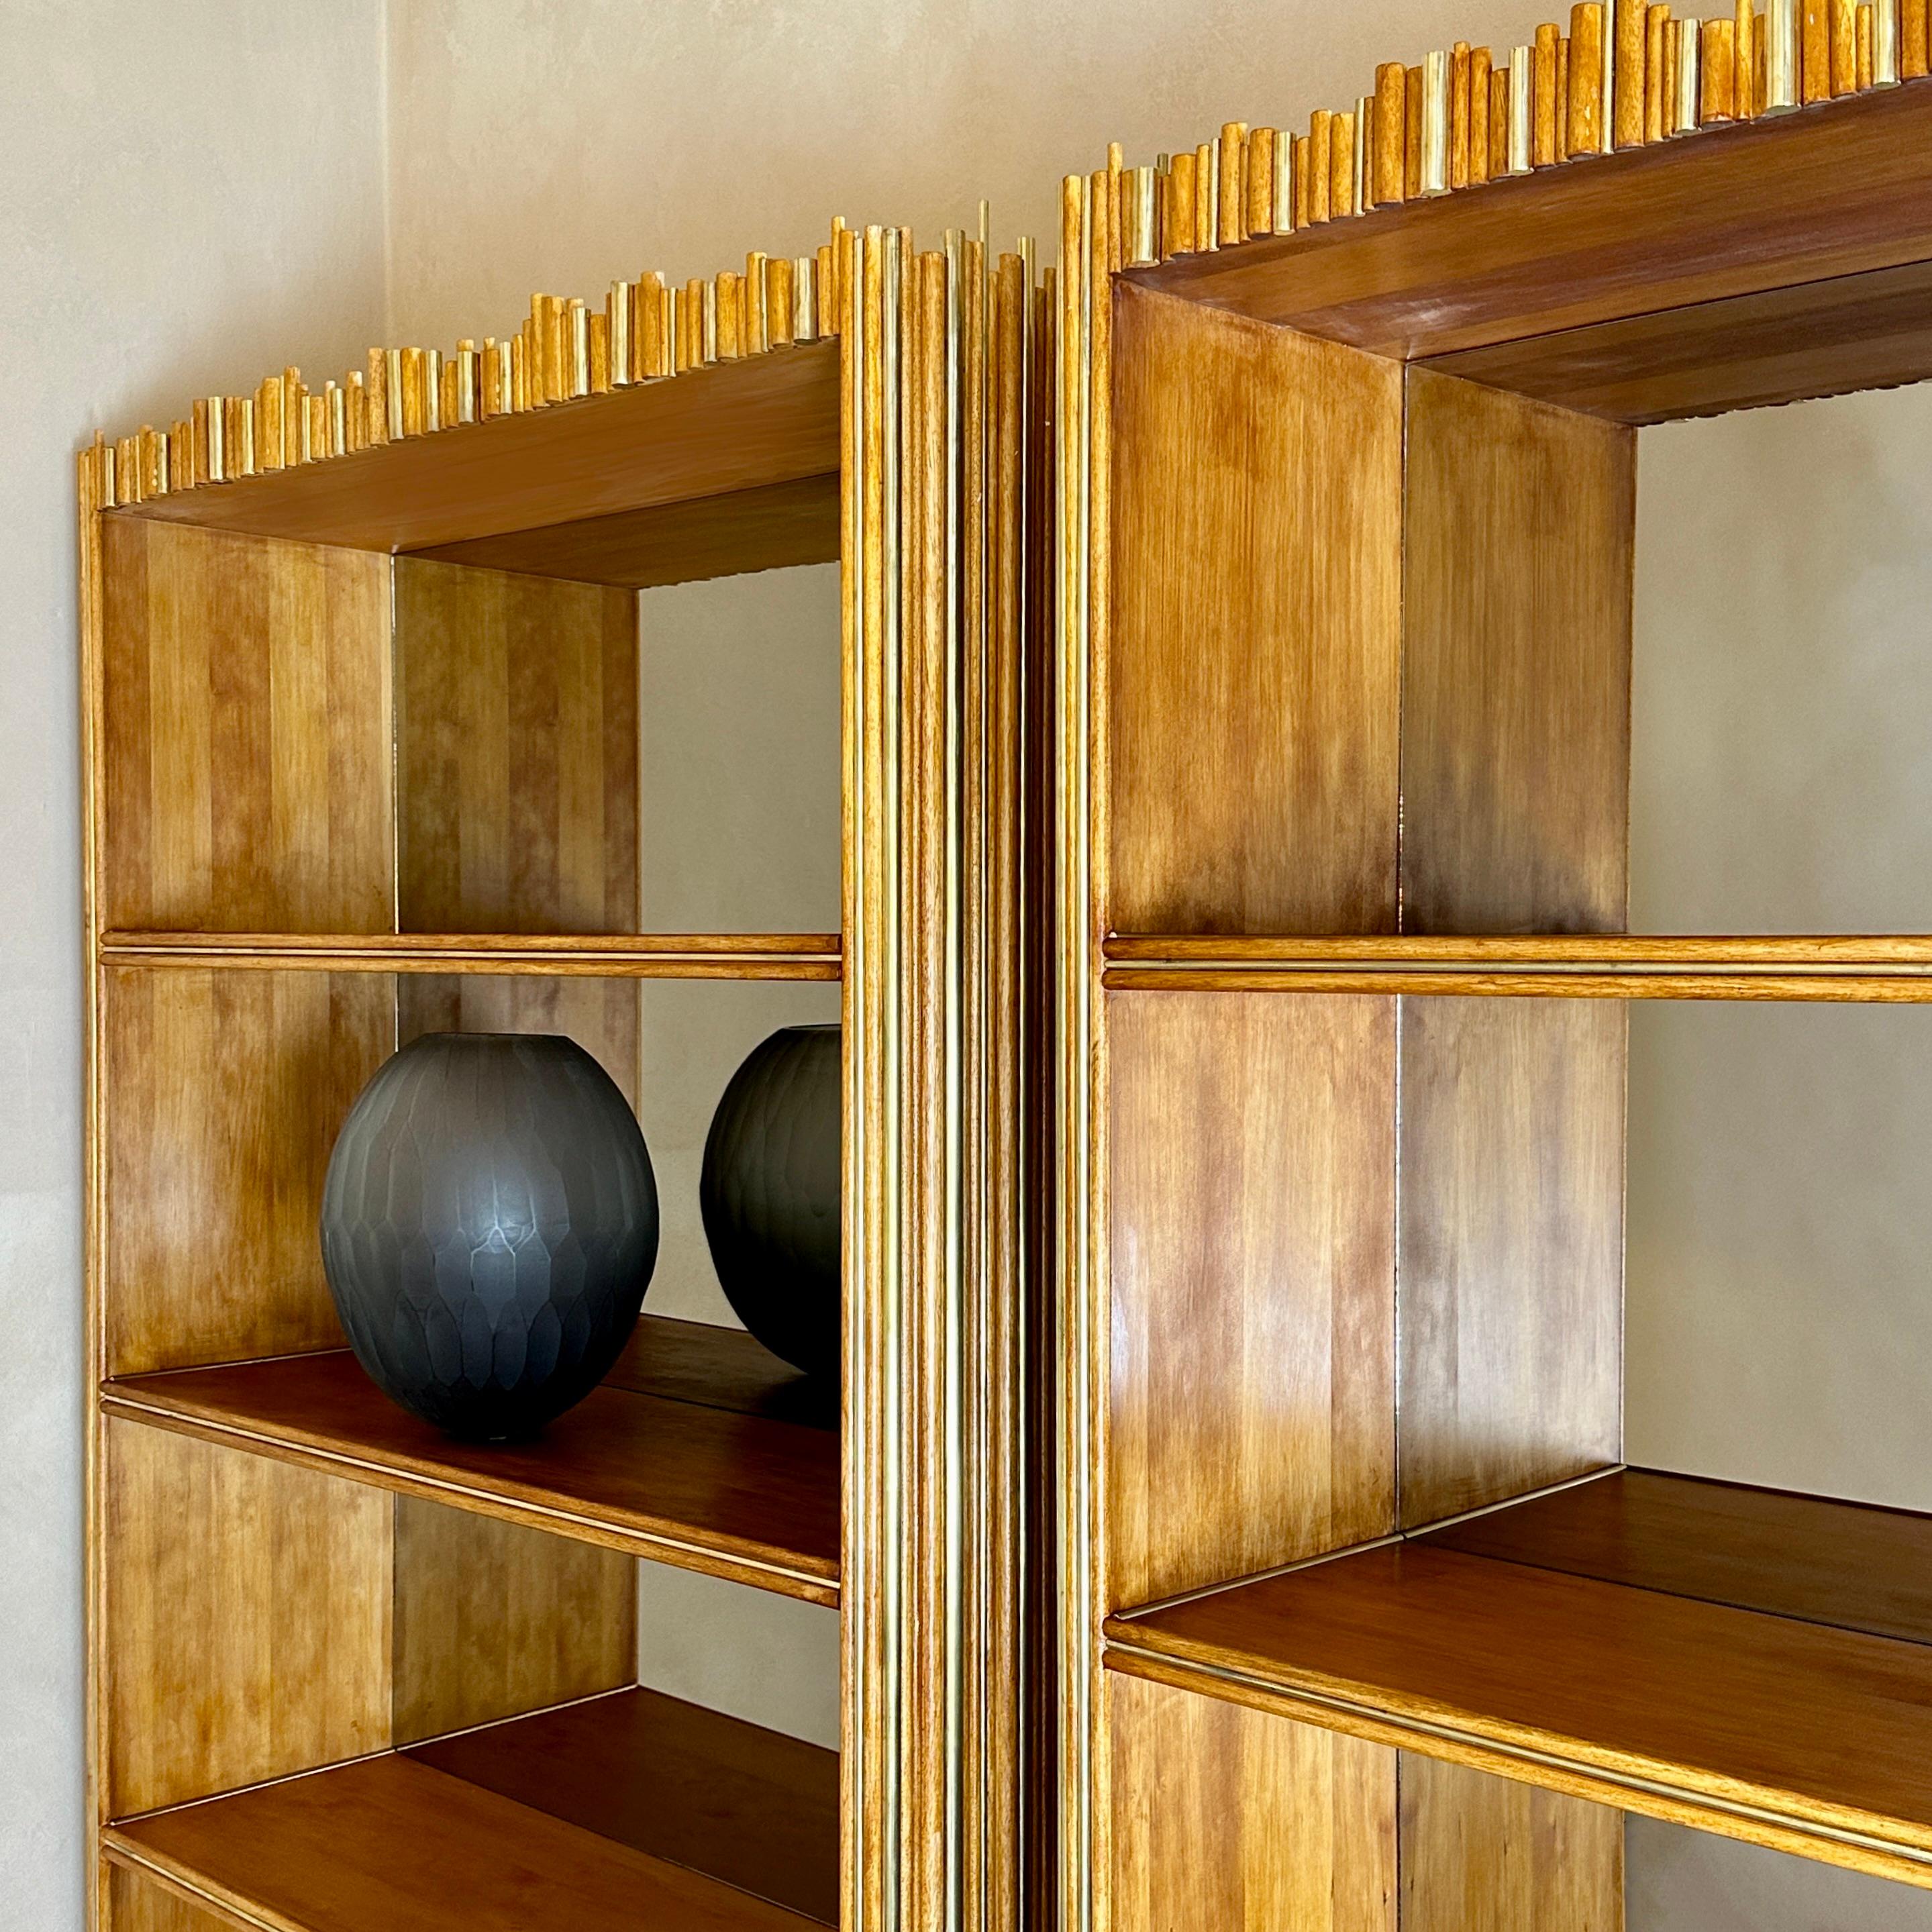 Late 20th Century Pair of Wood & Brass Breadsticks Bookcases w/Bronzed Mirrors In Good Condition For Sale In Firenze, Tuscany